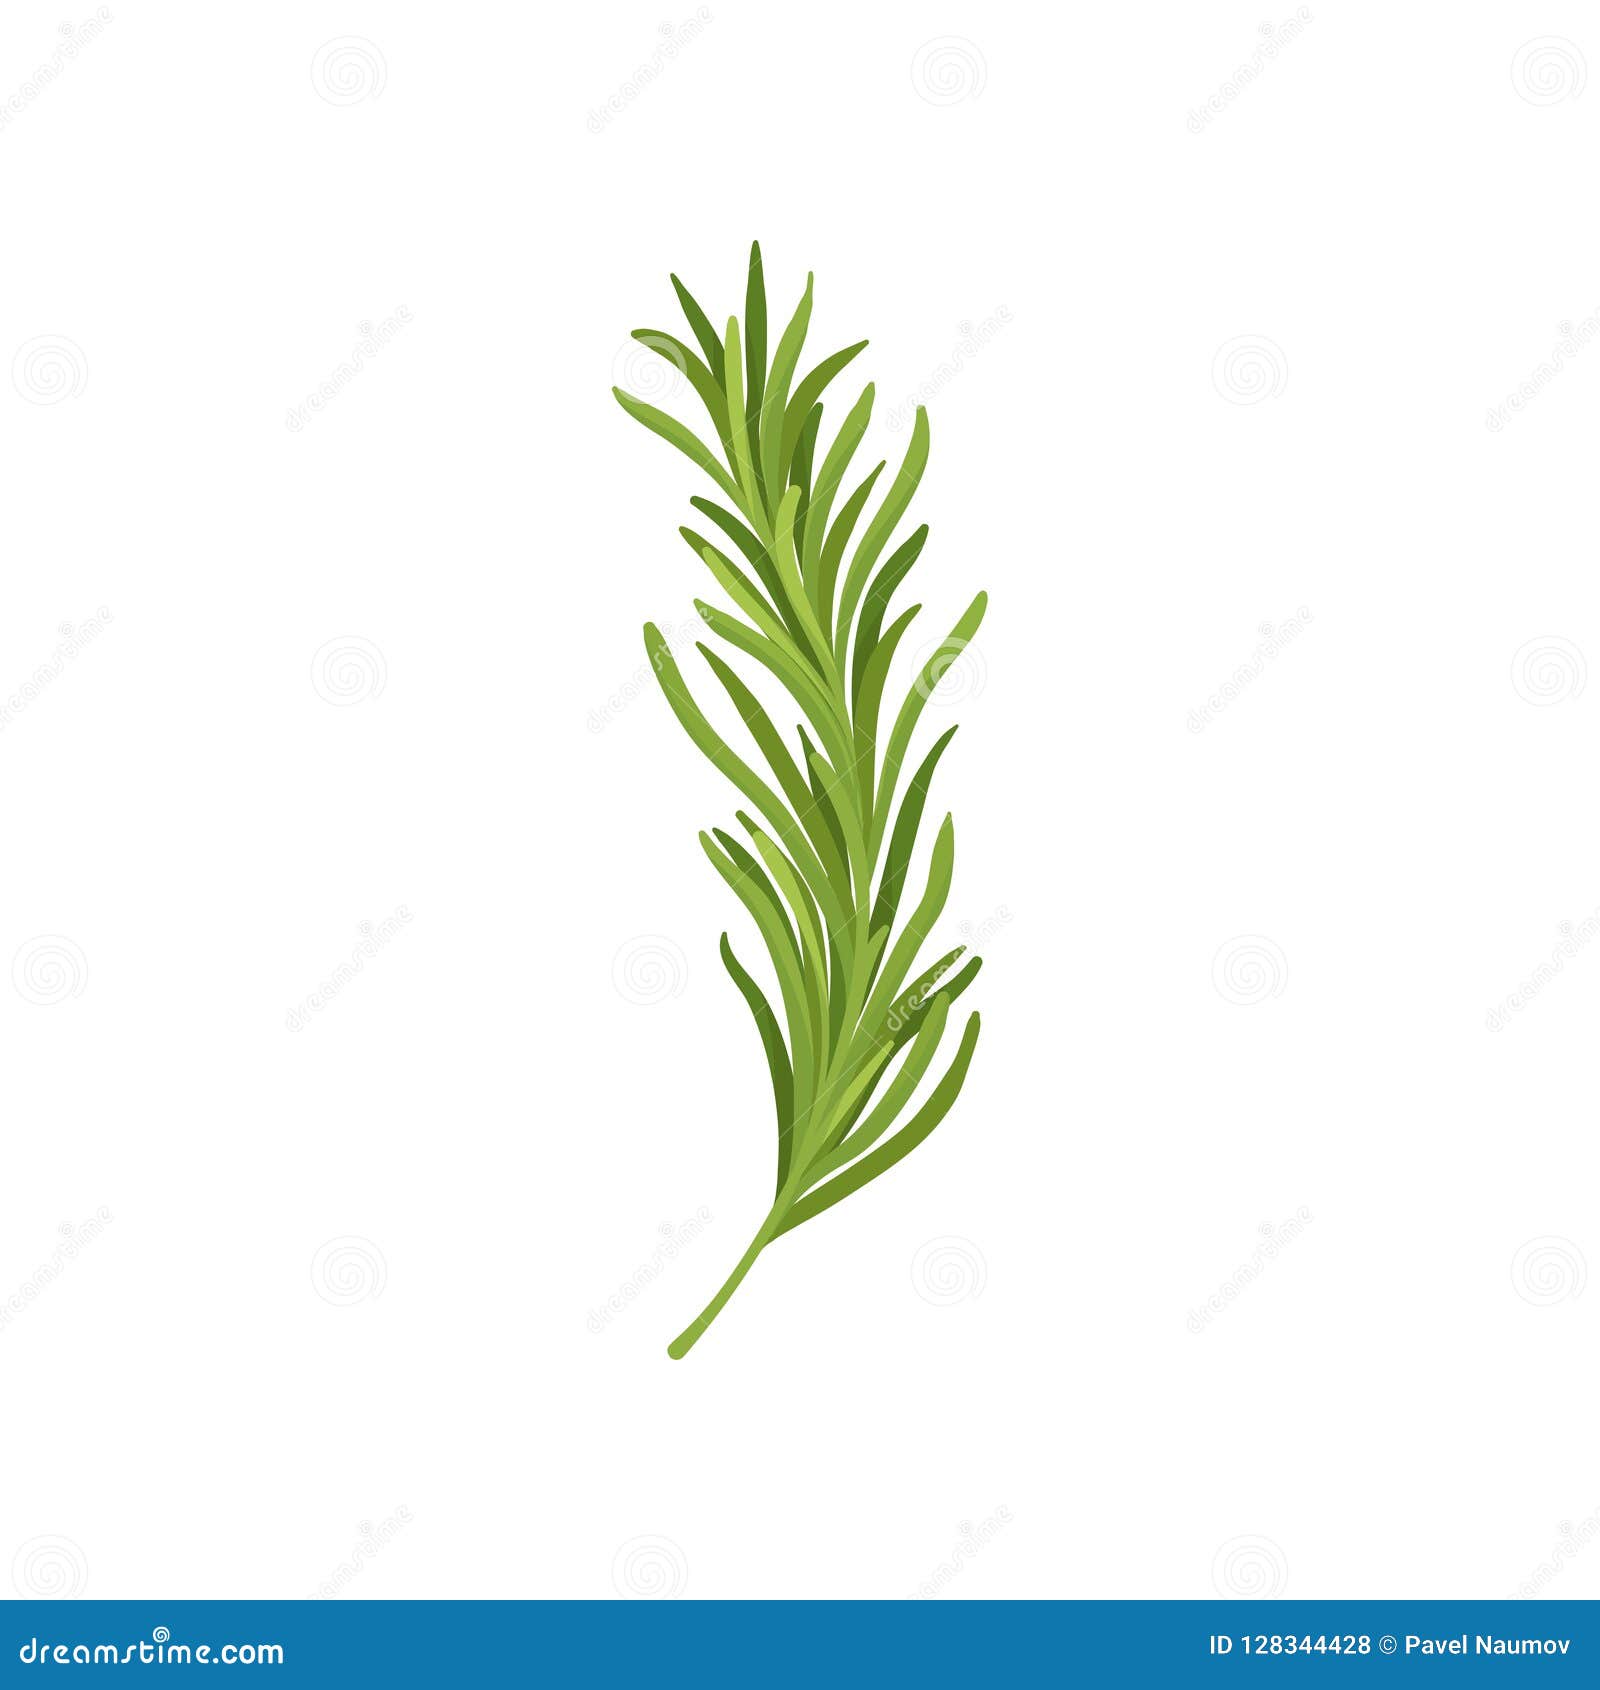 sprig of green rosemary. fresh herb used in culinary. organic ingredient for flavoring dishes. flat  